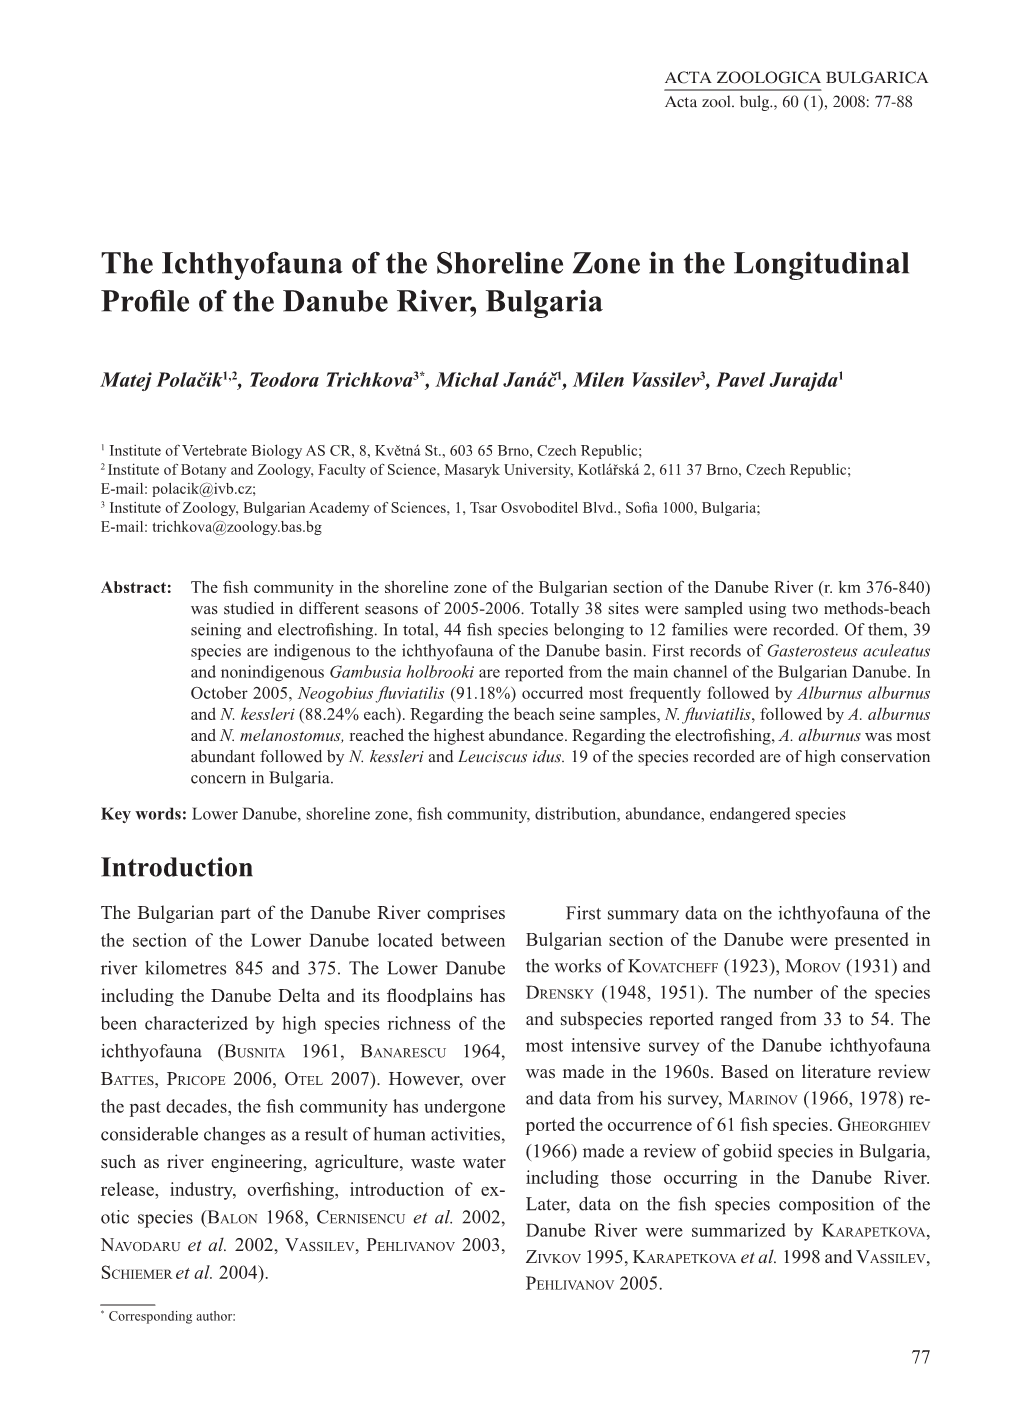 The Ichthyofauna of the Shoreline Zone in the Longitudinal Profile of the Danube River, Bulgaria